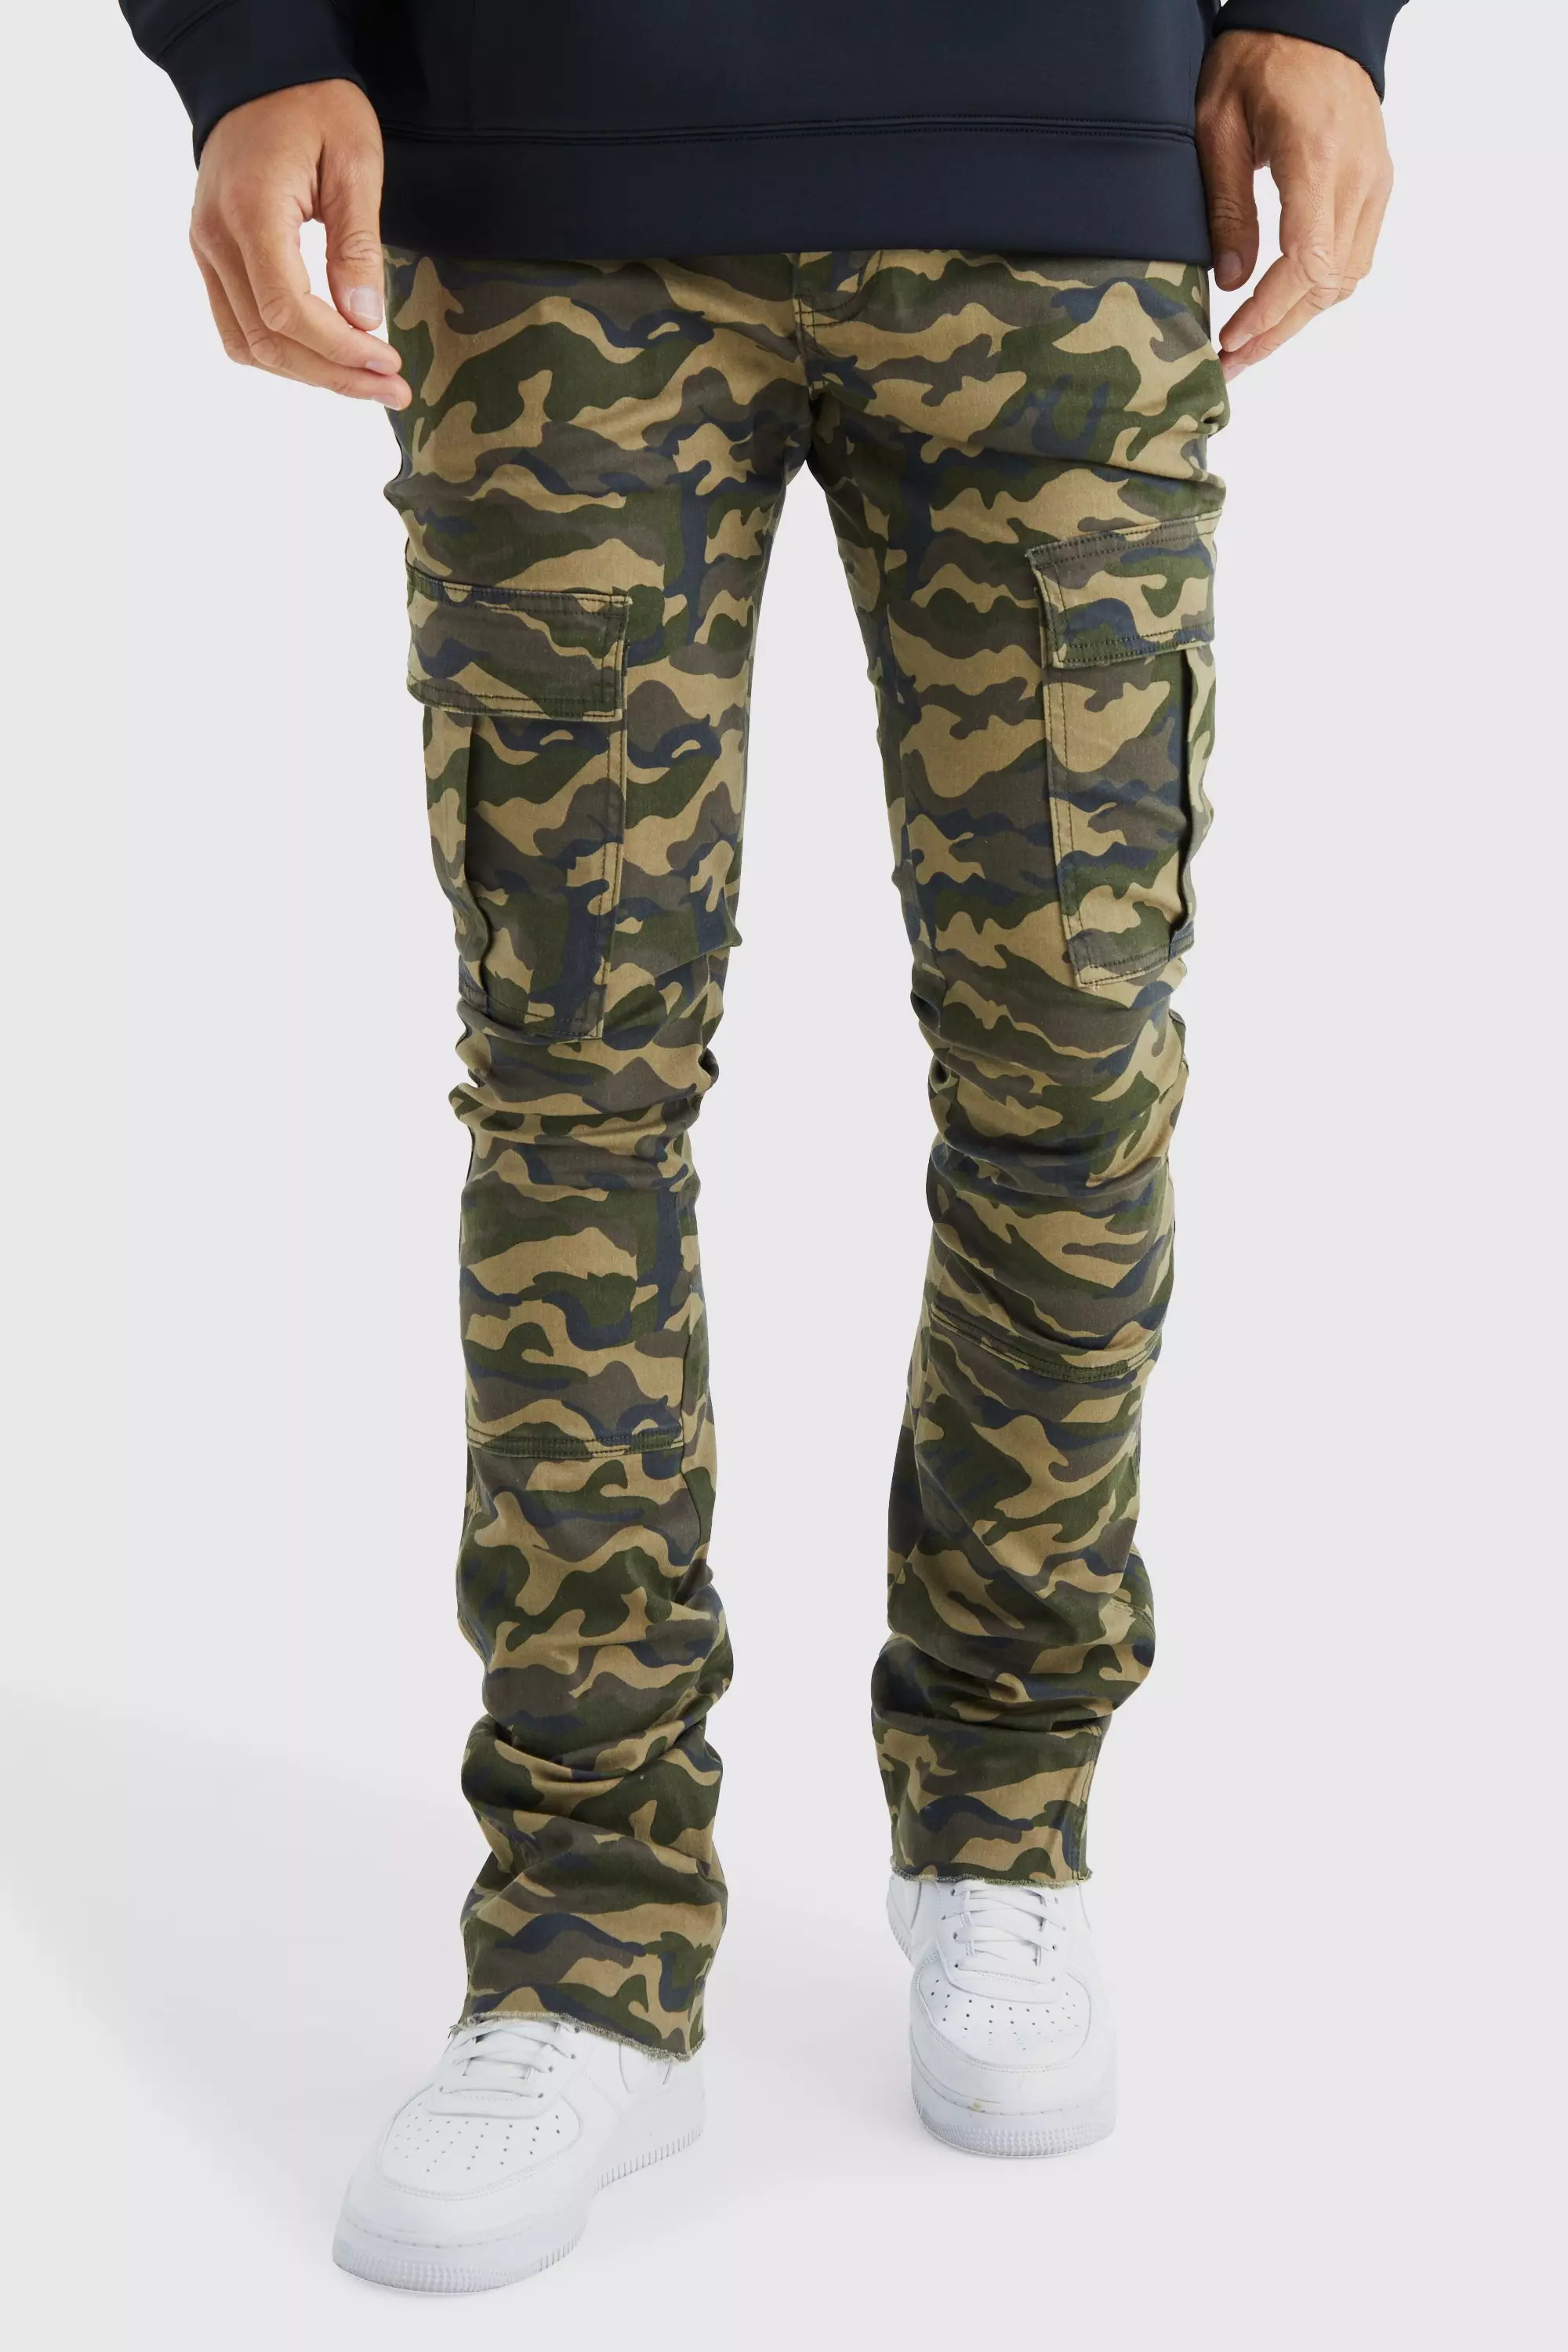 Tall Skinny Stacked Flare Gusset Camo Cargo Pants Sand